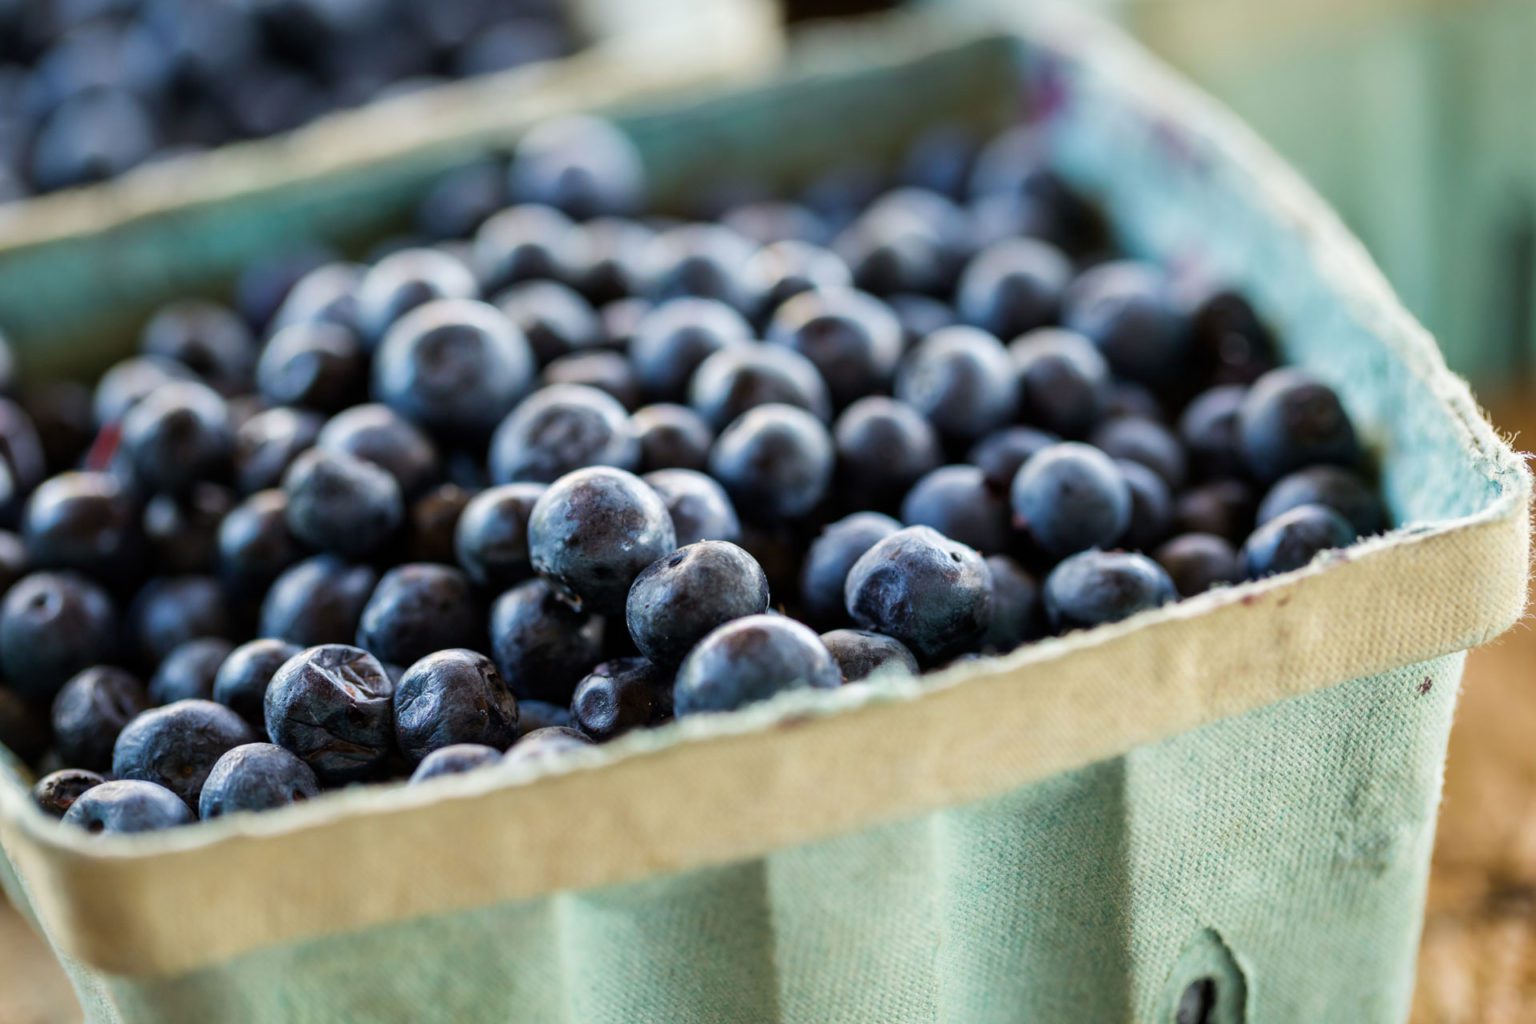 Blueberry shipments show off CFI’s exacting standards